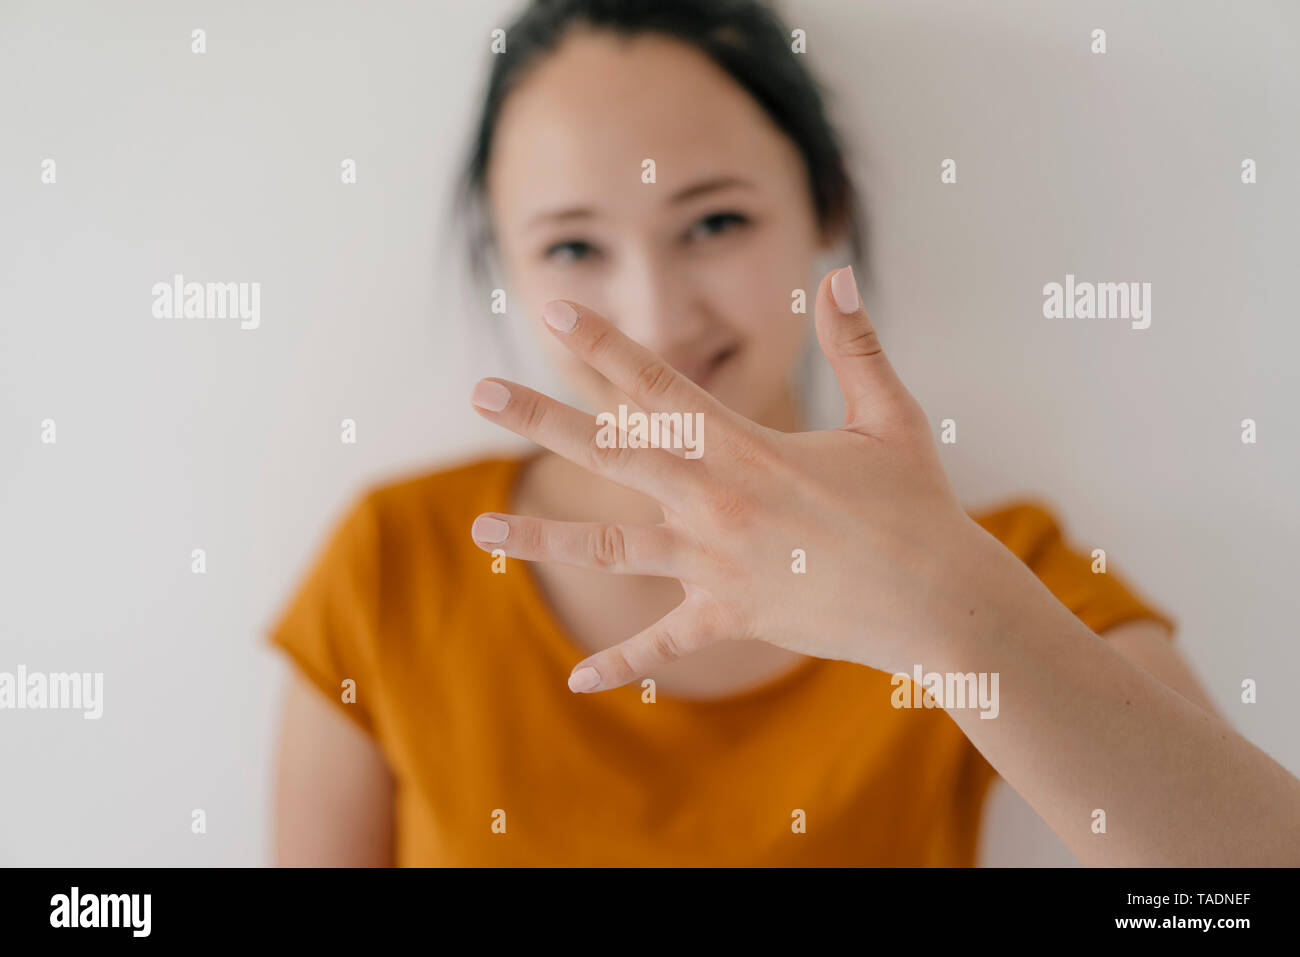 Young woman showing her hand Stock Photo